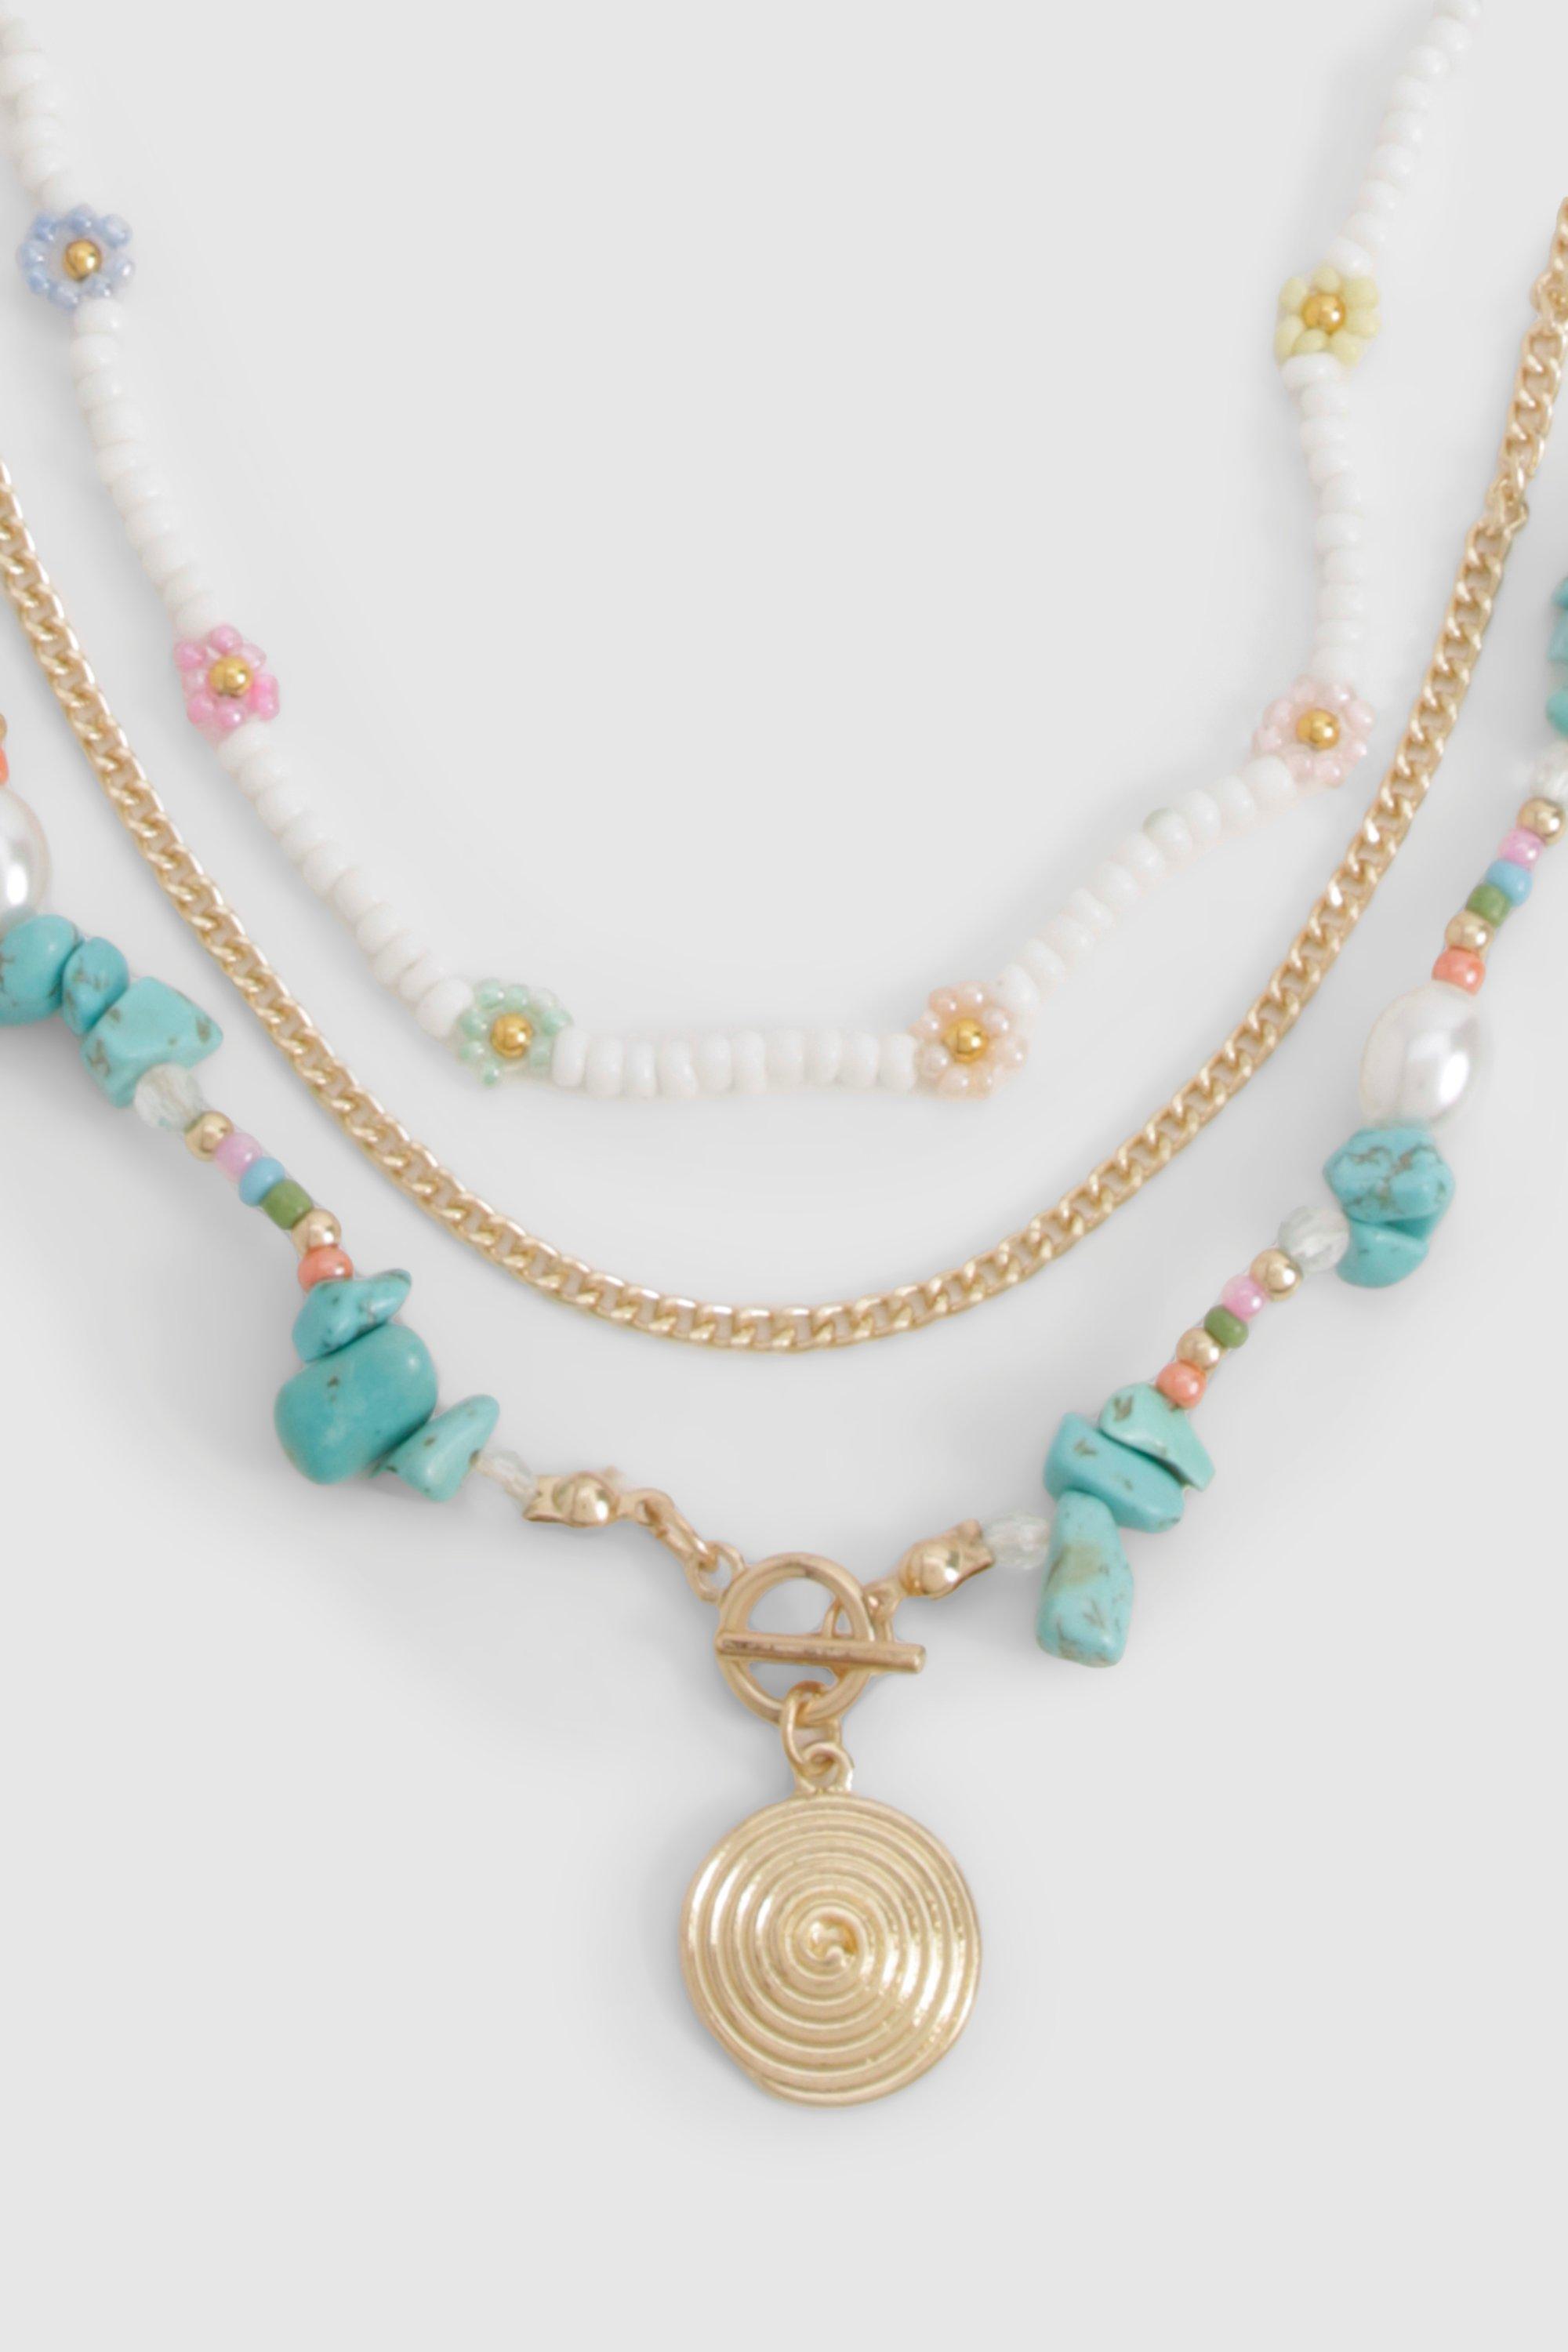 Image of Floral Beaded Pendant Layered Neclace, Azzurro